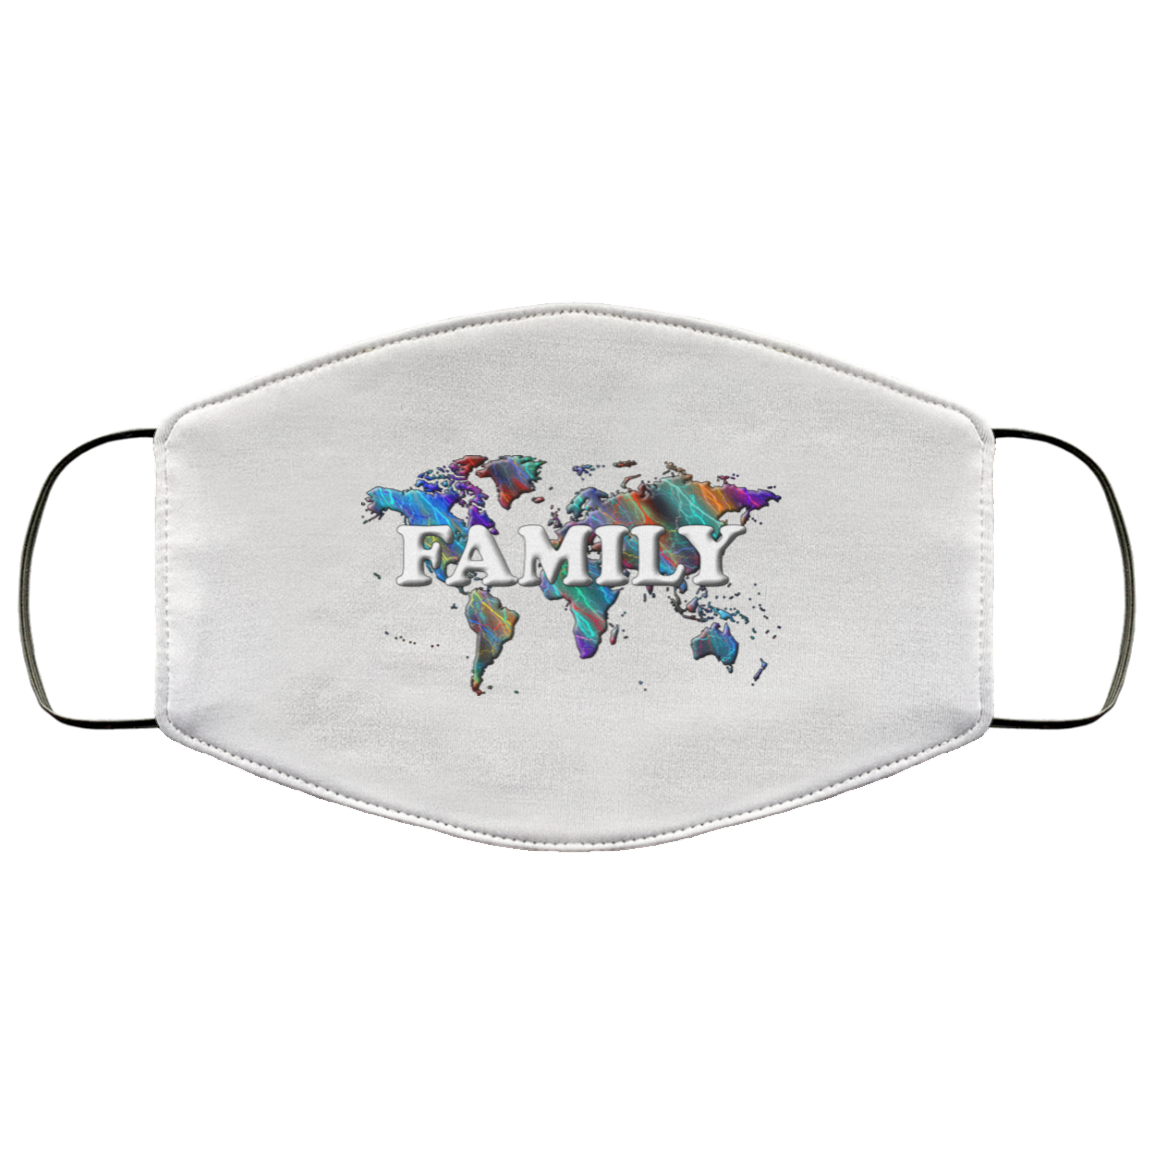 Family 2 Layer Protective Mask